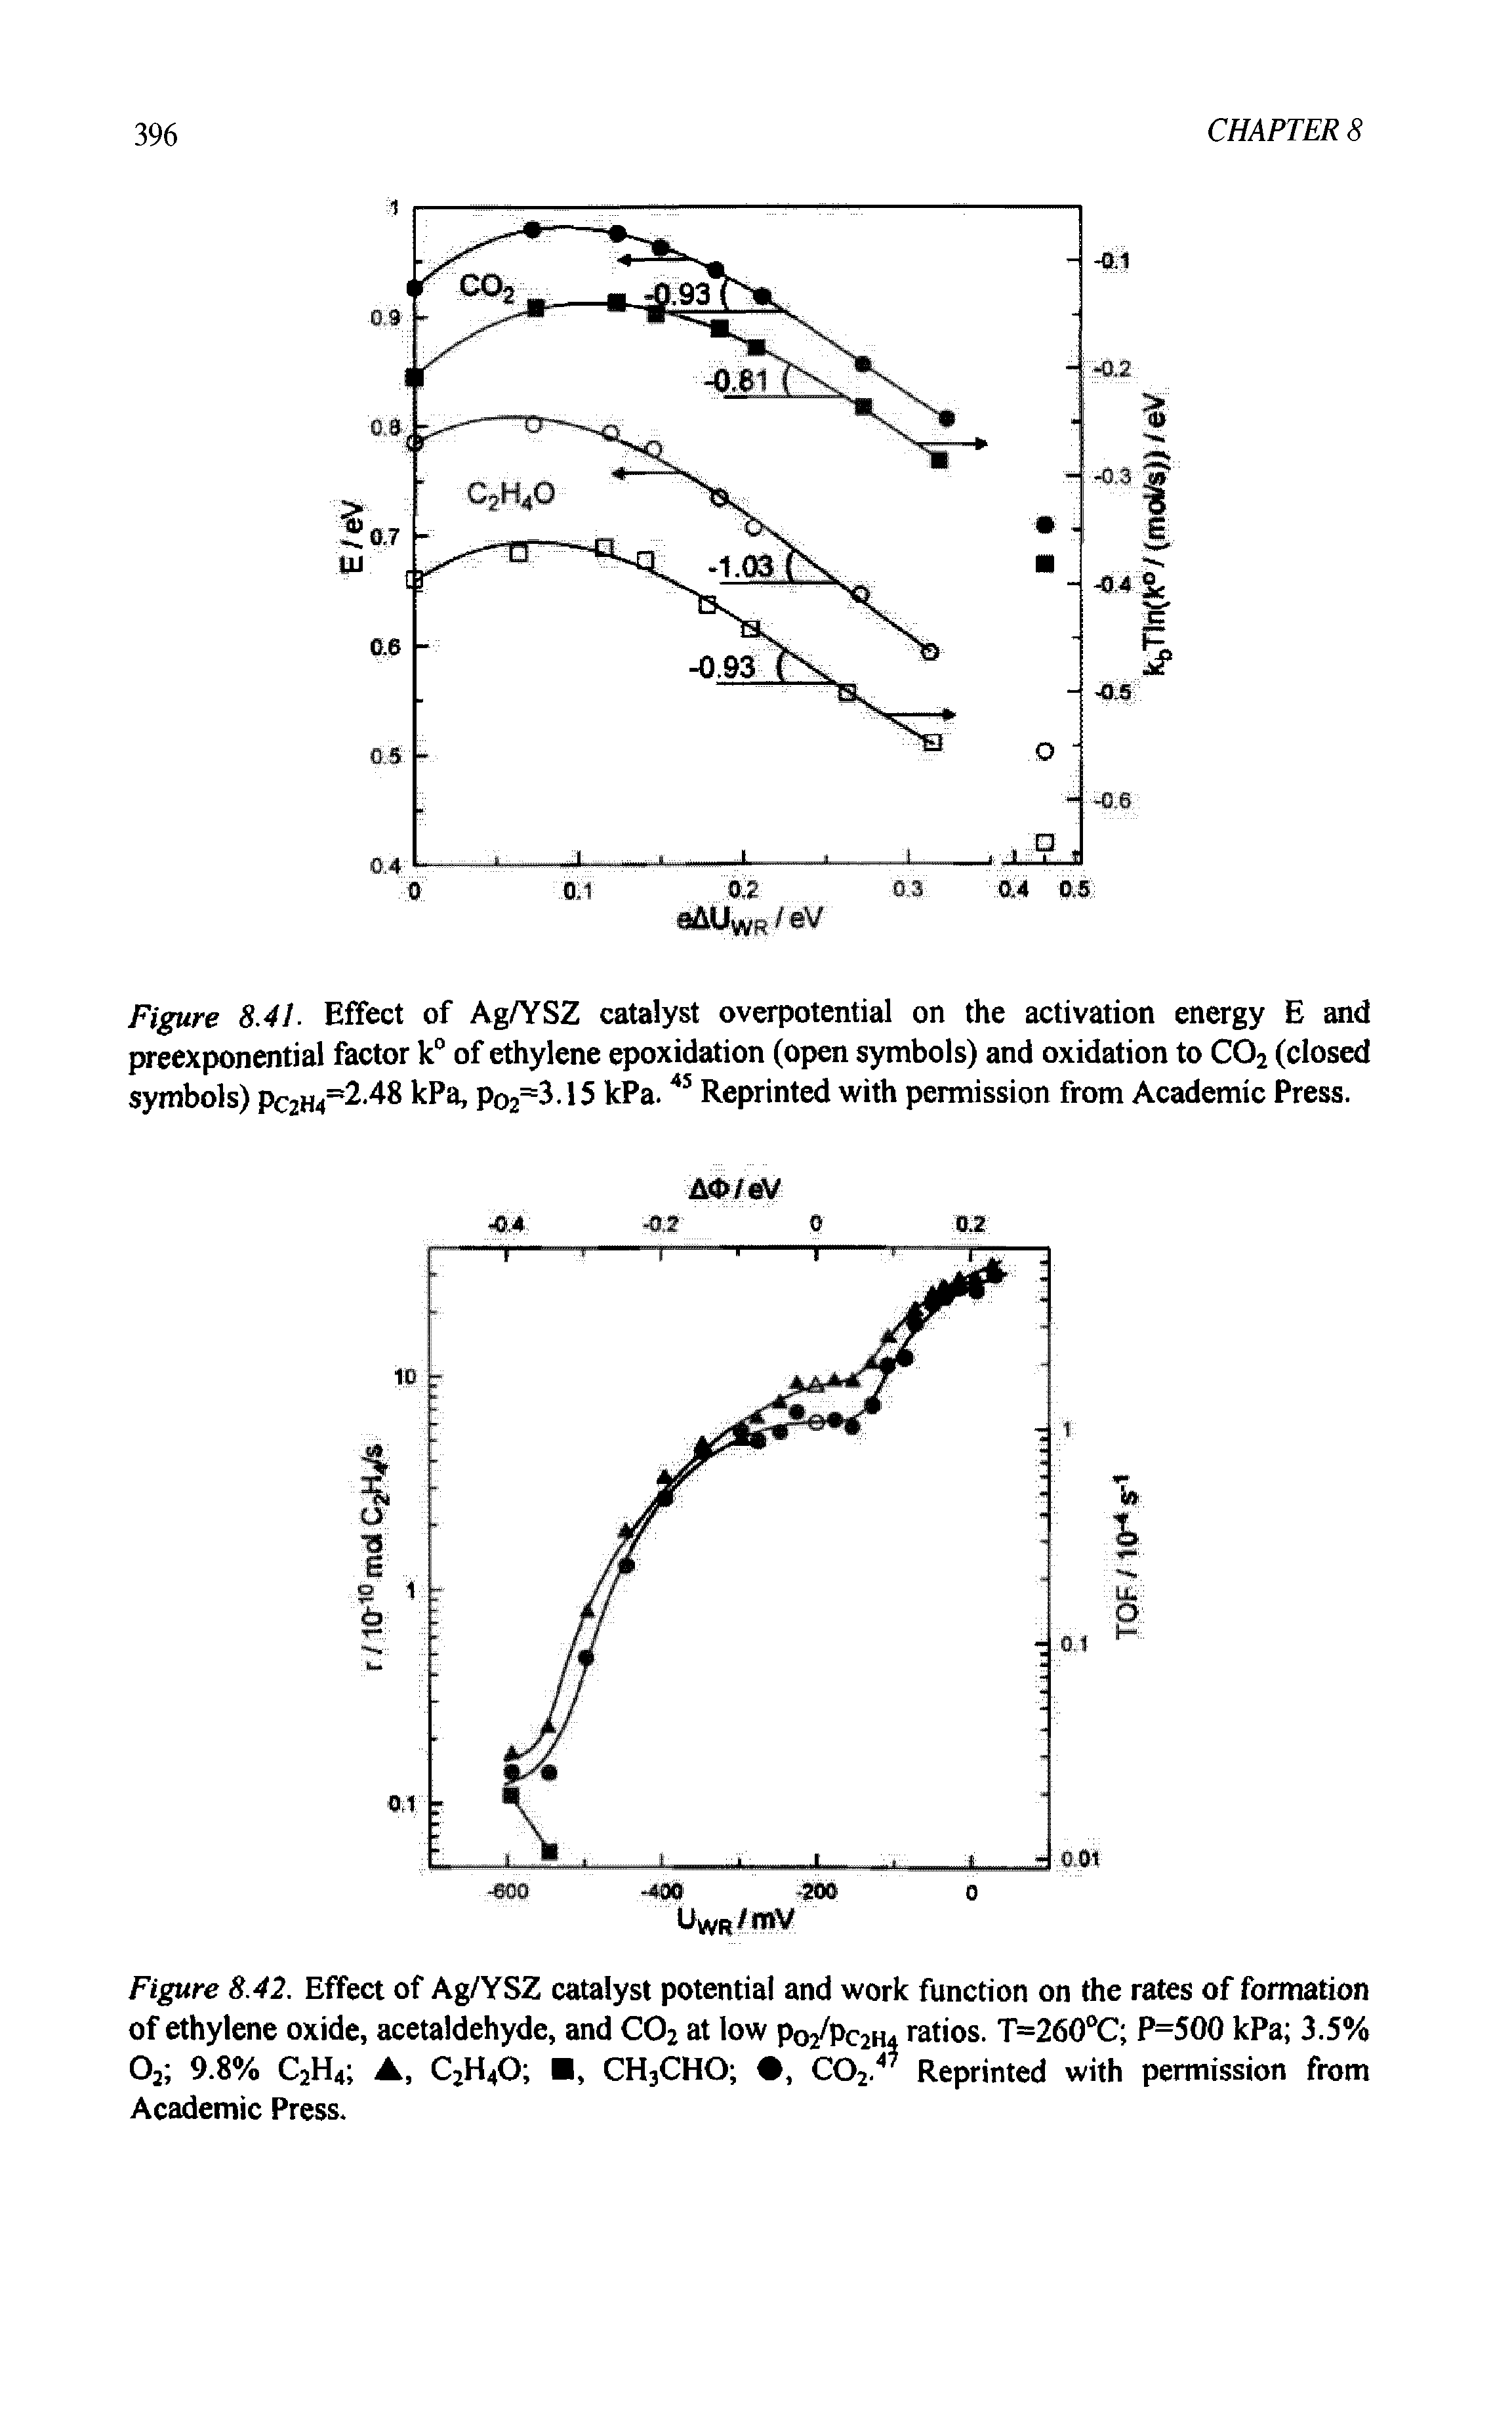 Figure 8.42. Effect of Ag/YSZ catalyst potential and work function on the rates of formation of ethylene oxide, acetaldehyde, and C02 at low Po/Pc2h4 ratios. T=260°C P=500 kPa 3.5% 02 9.8% C2H4 , C2H40 , CH3CHO , C02. Reprinted with permission from Academic Press.